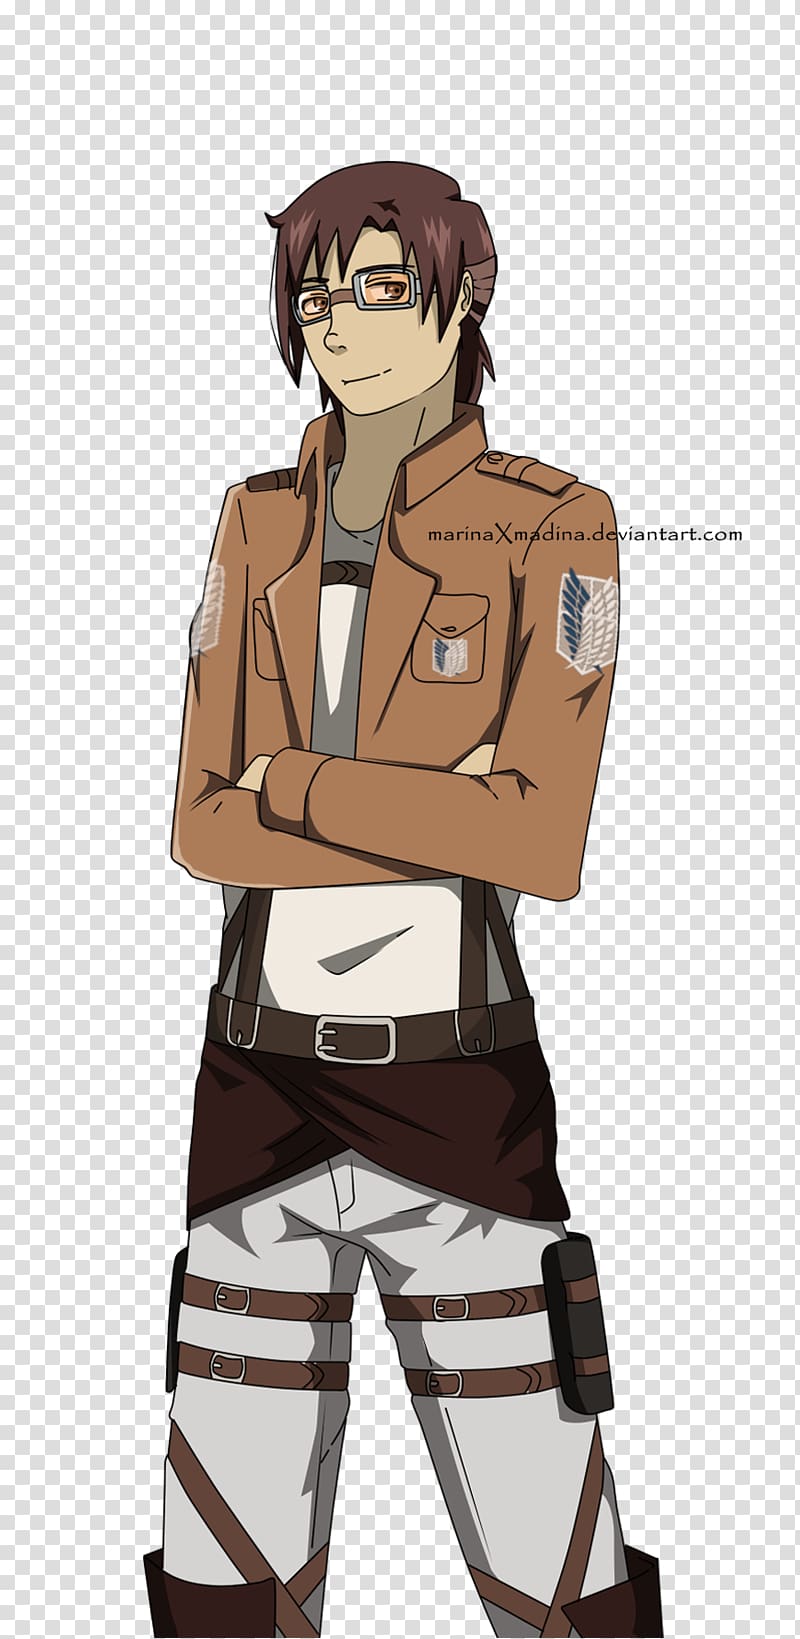 Attack on Titan Fan art Character Anime, attack on titan transparent background PNG clipart